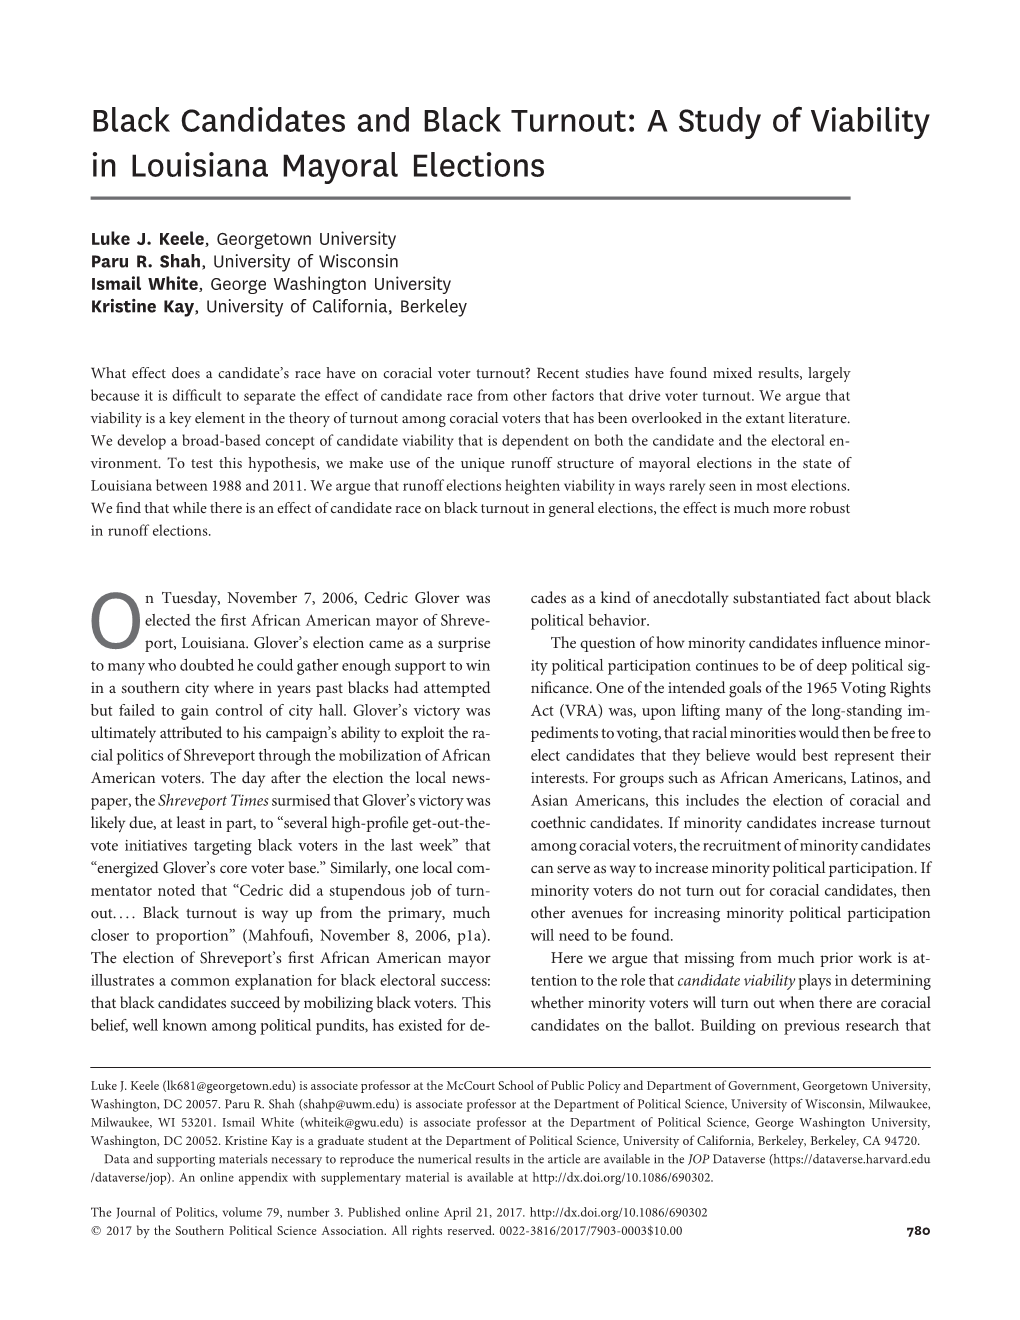 Black Candidates and Black Turnout: a Study of Viability in Louisiana Mayoral Elections